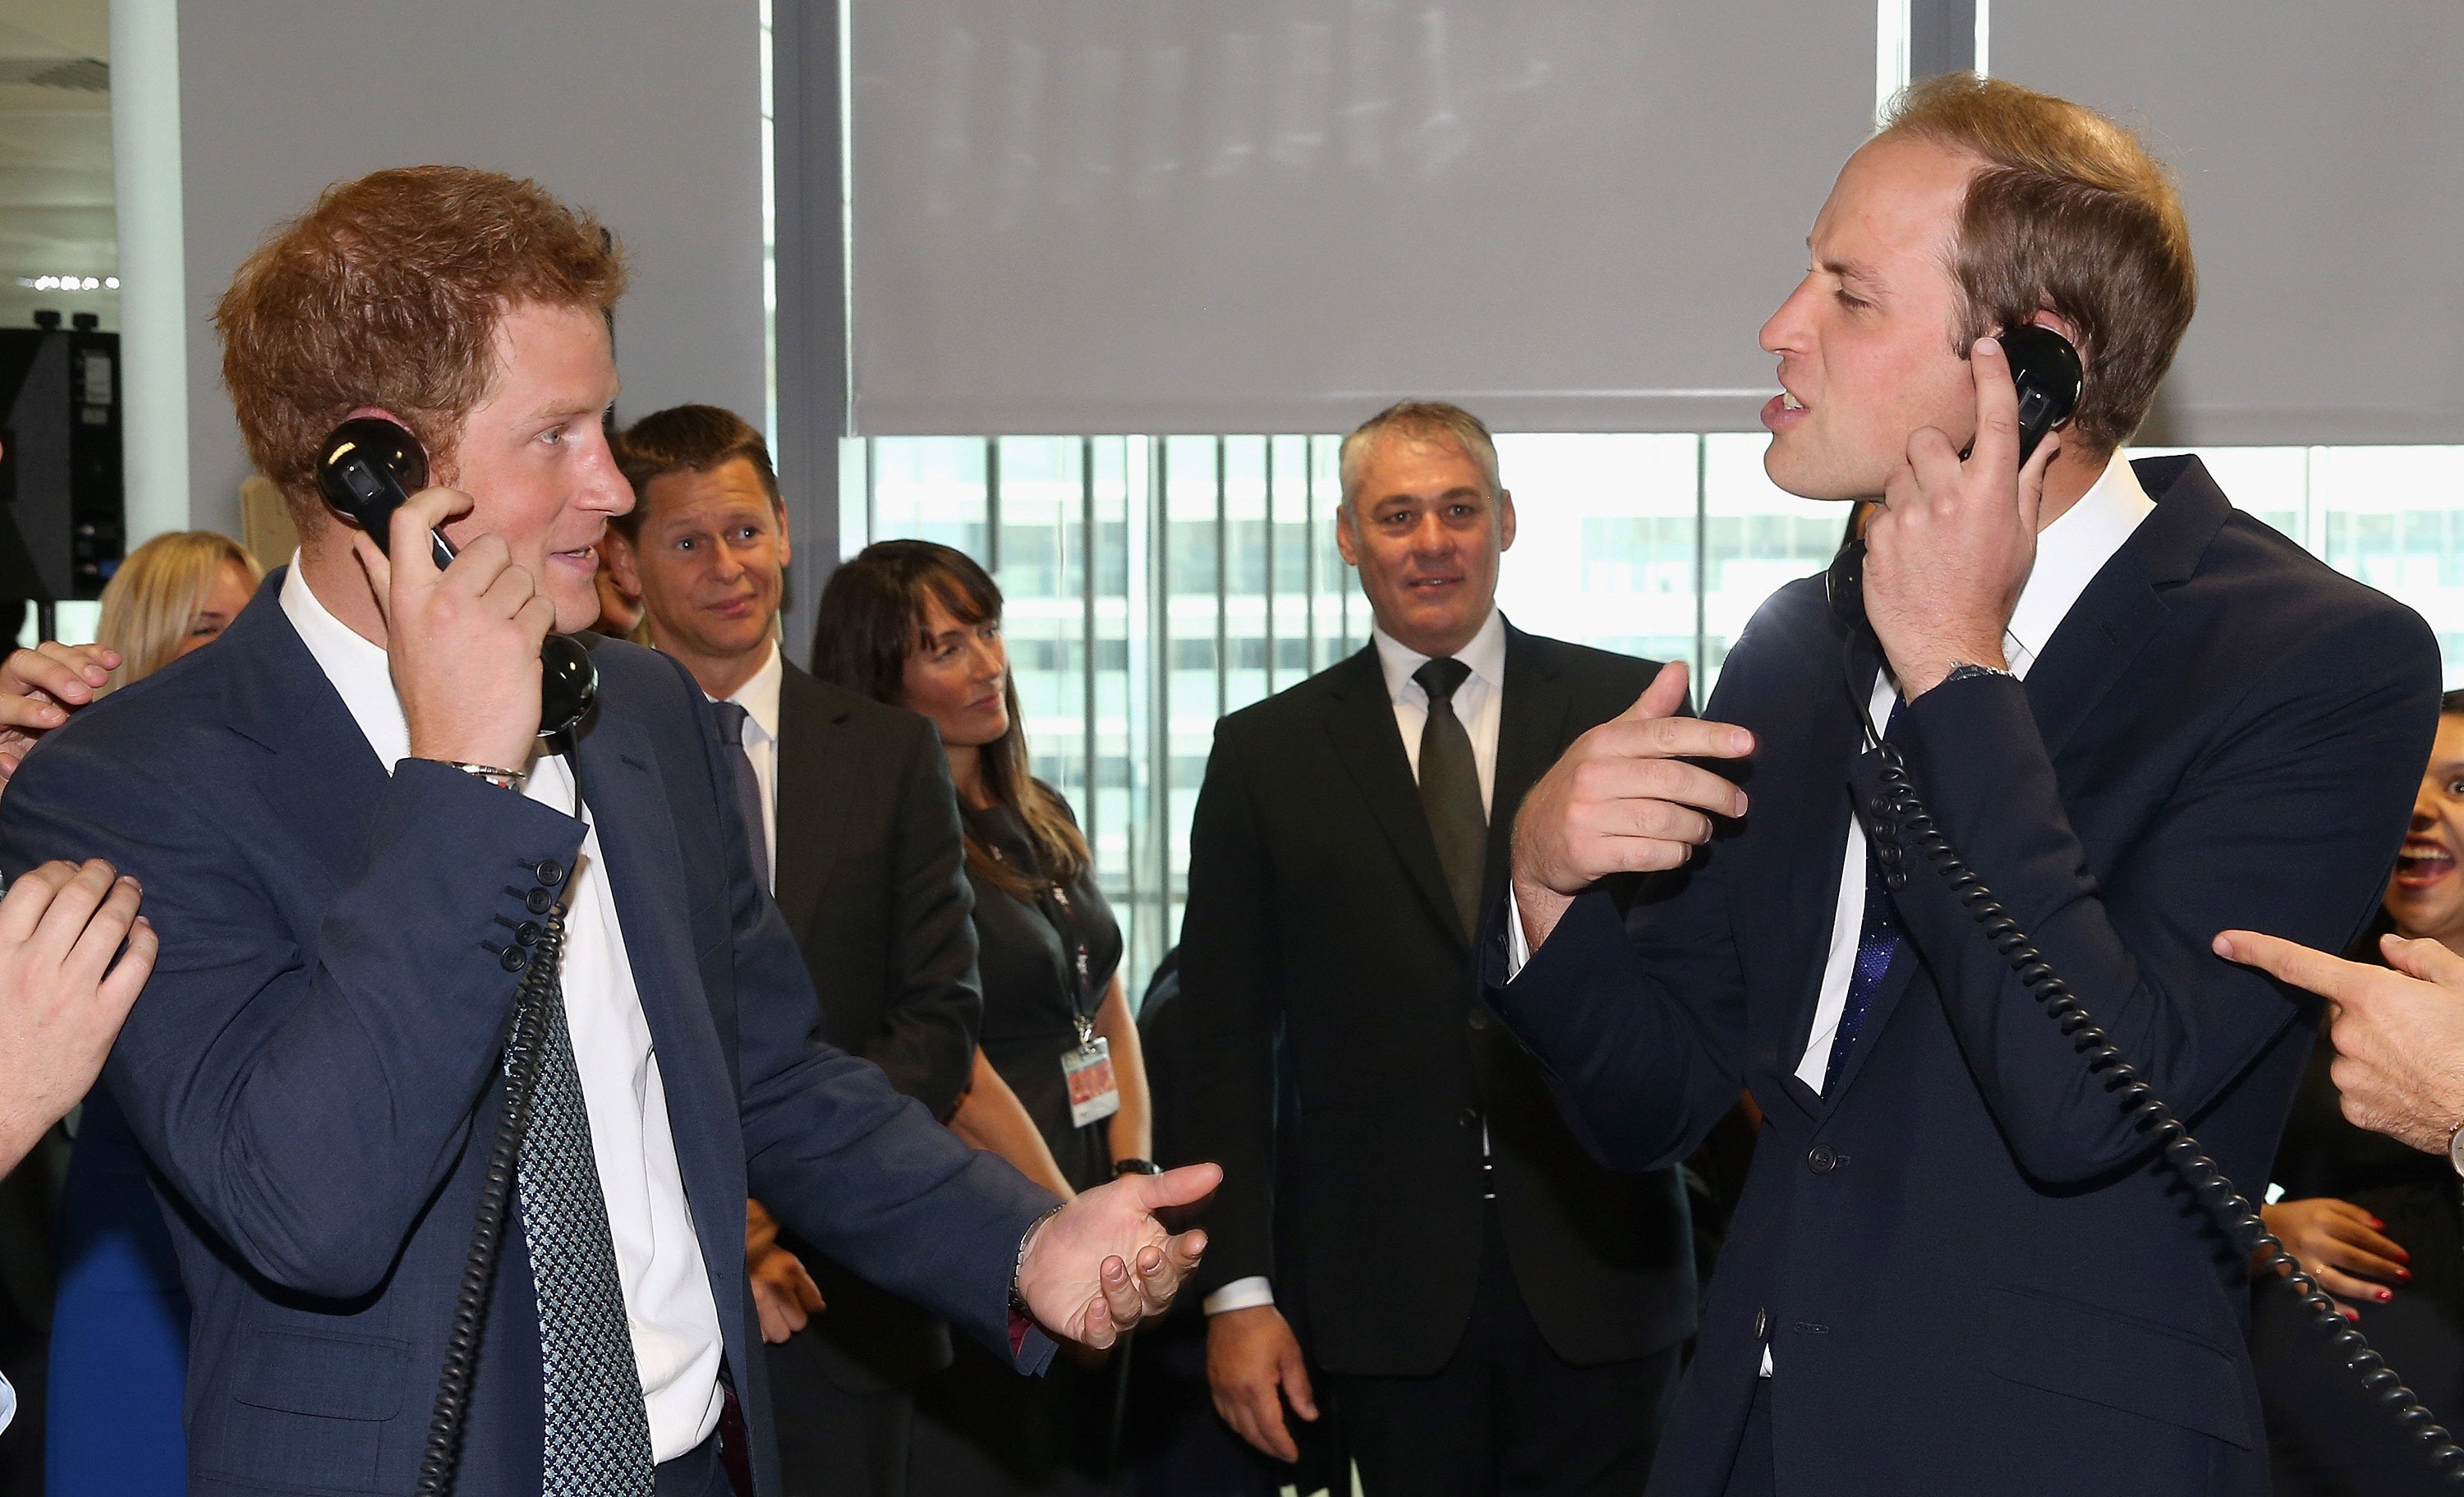 Prince Harry and Prince William's Secret Code Word Revealed